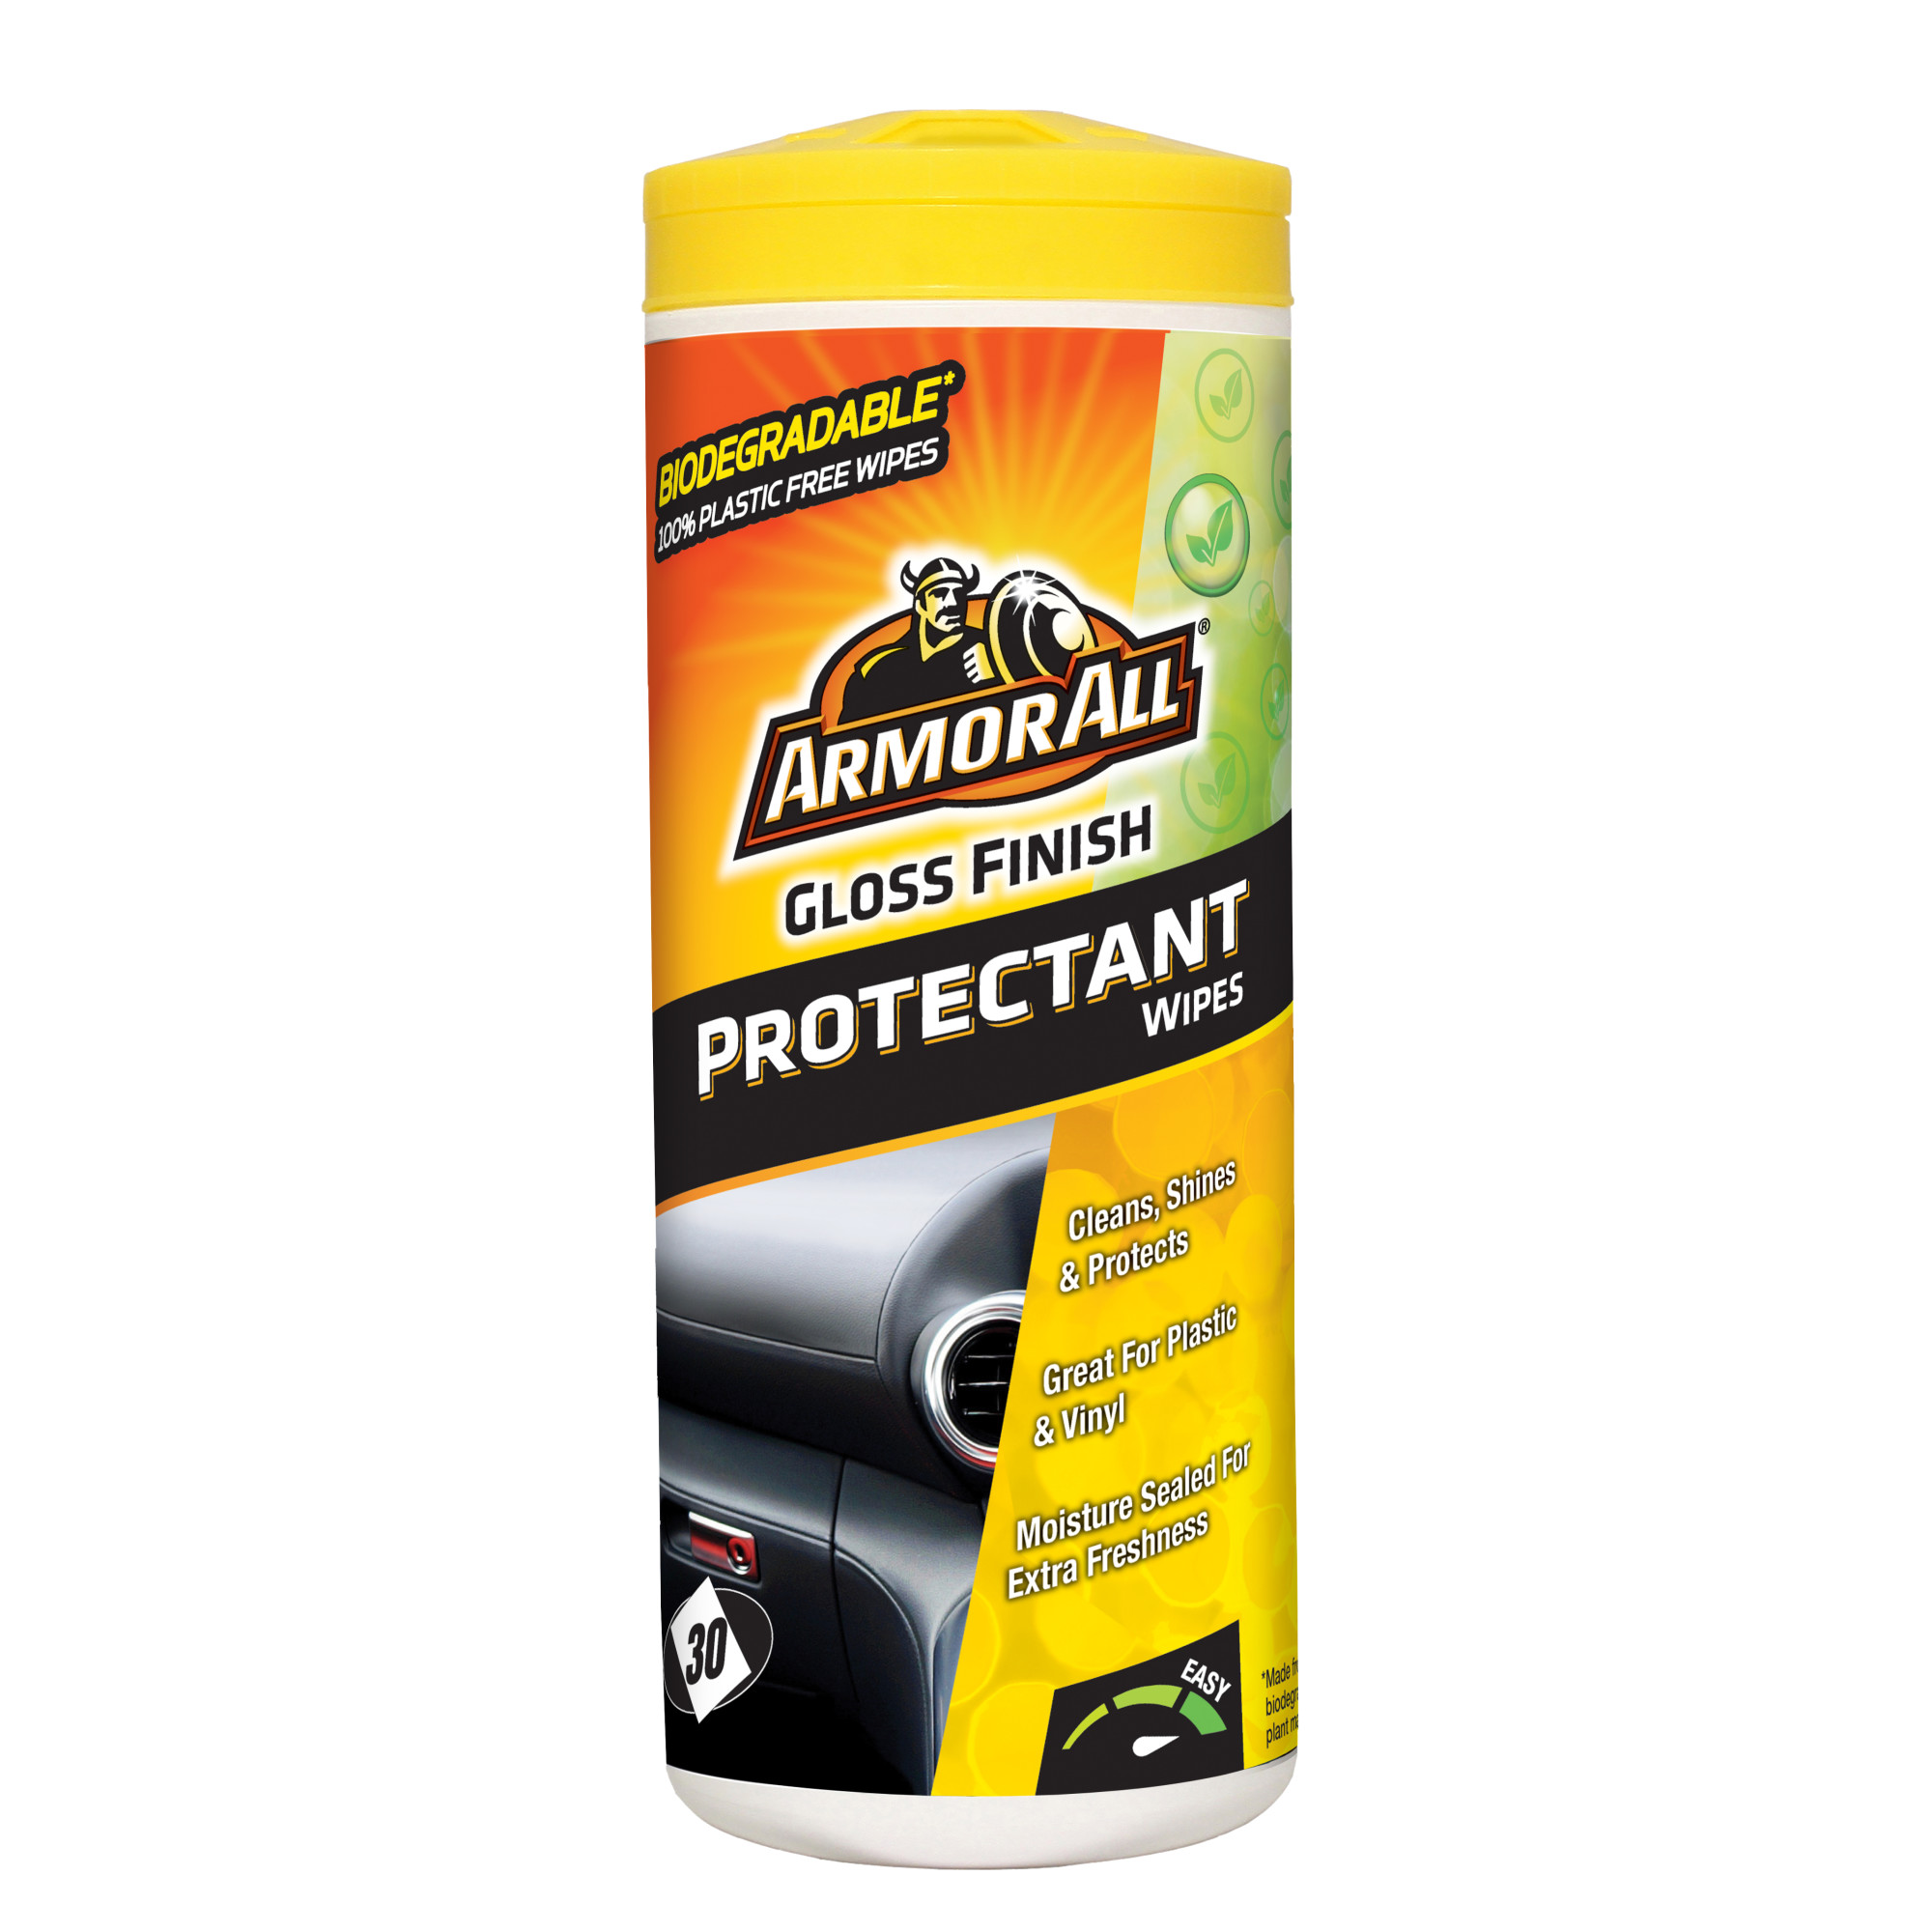 Armor All Protectant Wipes 30ct – BevMo!